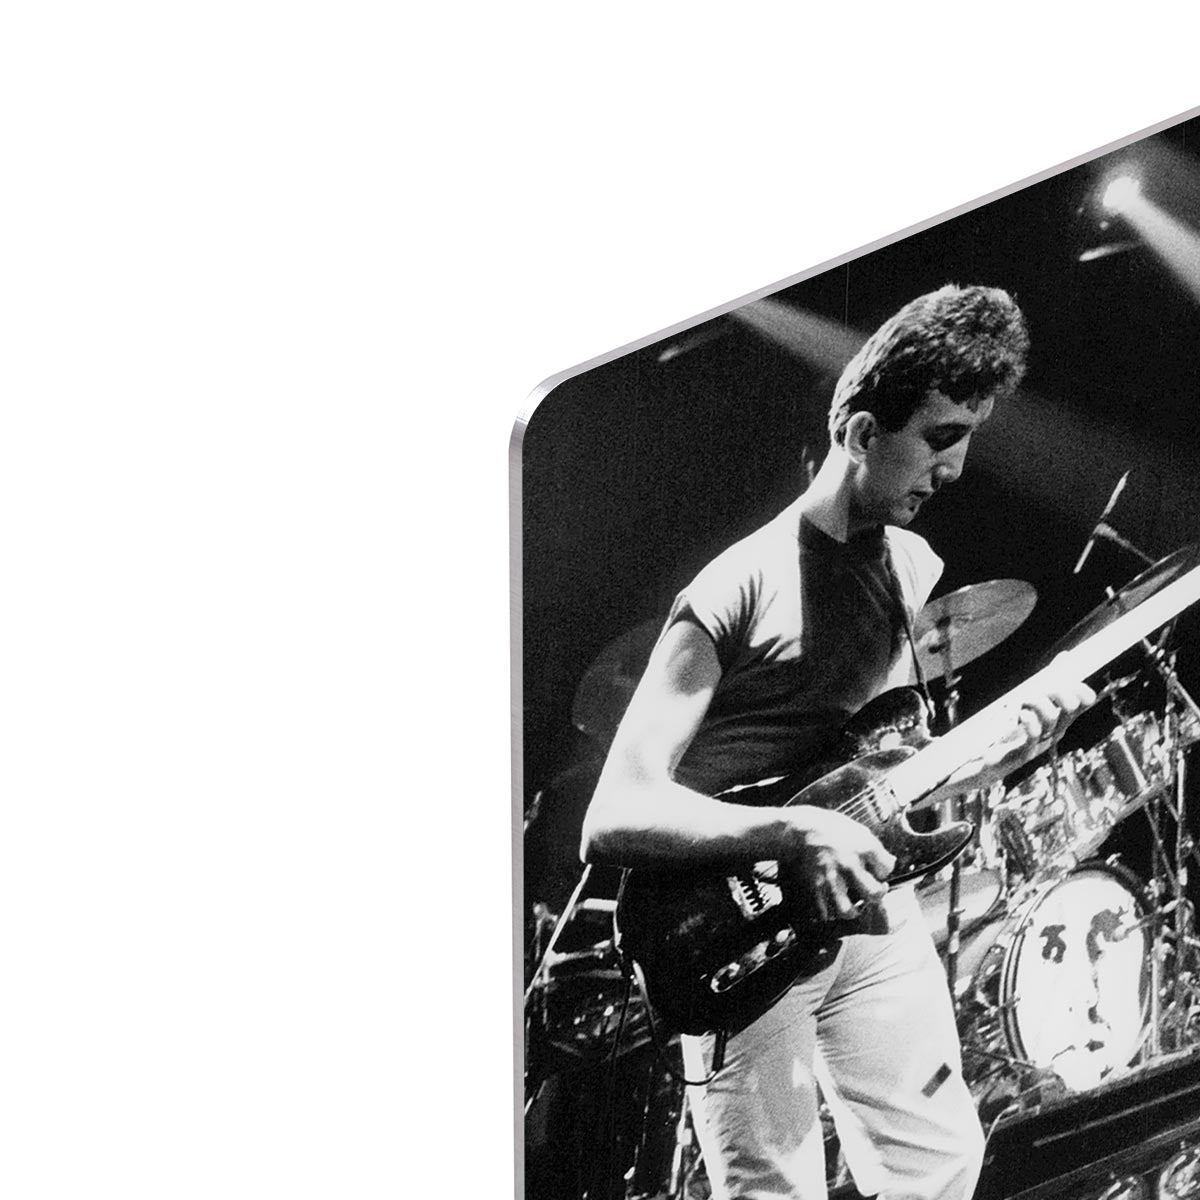 Queen Live On Stage HD Metal Print